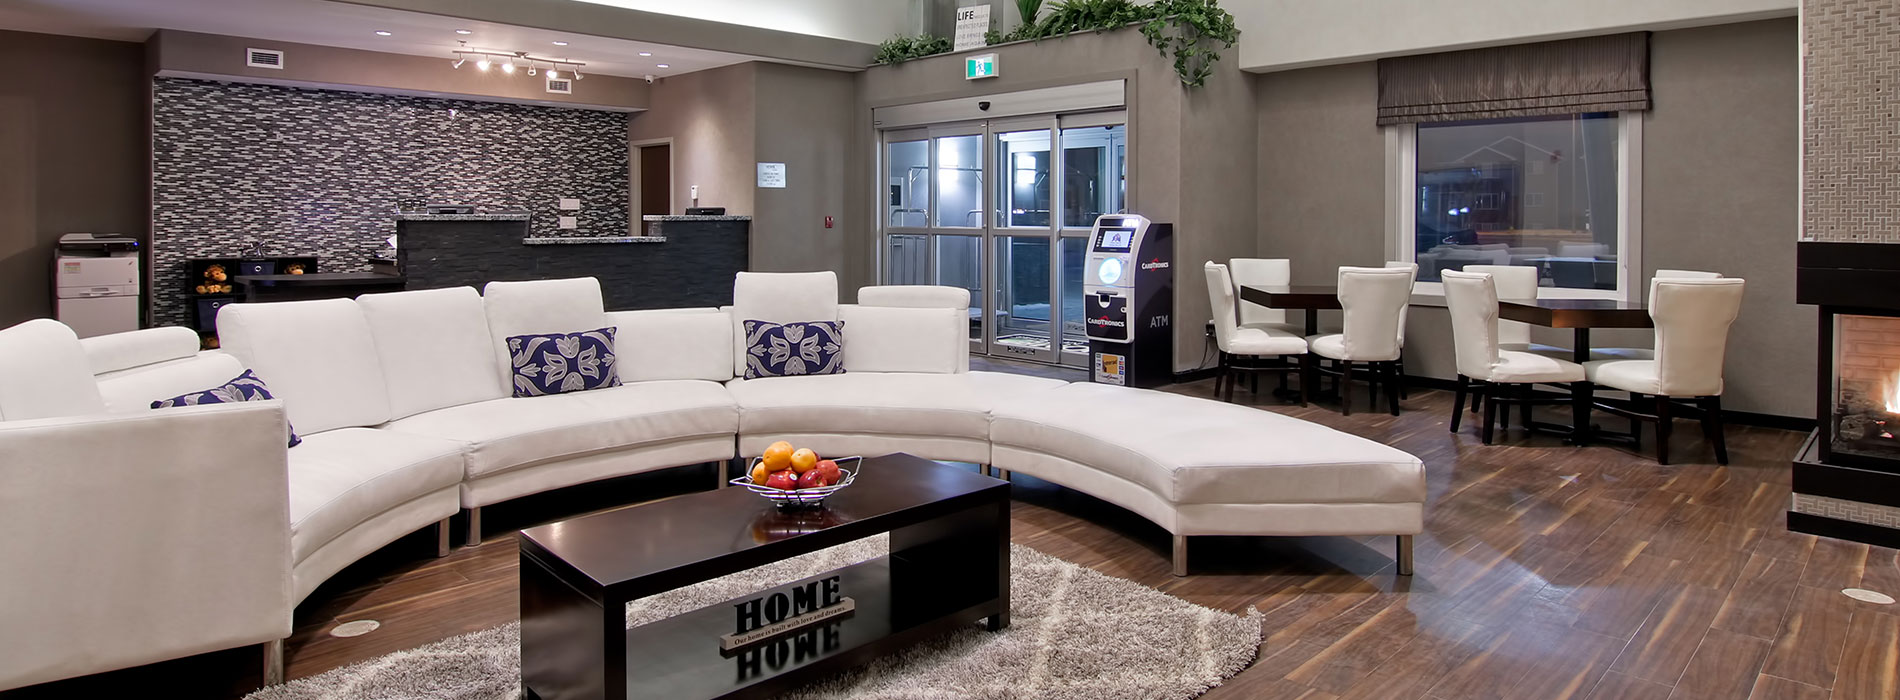 A large semi-circular white sectional sofa dominates the space in the lobby of d3h Home Inn & Suites Regina Airport.  Around the perimeter of the space is an ATM placed next to the glass door entrance and the slate gray stone check-in counter stands in stark contrast against a black, white and gray patterned accent wall.